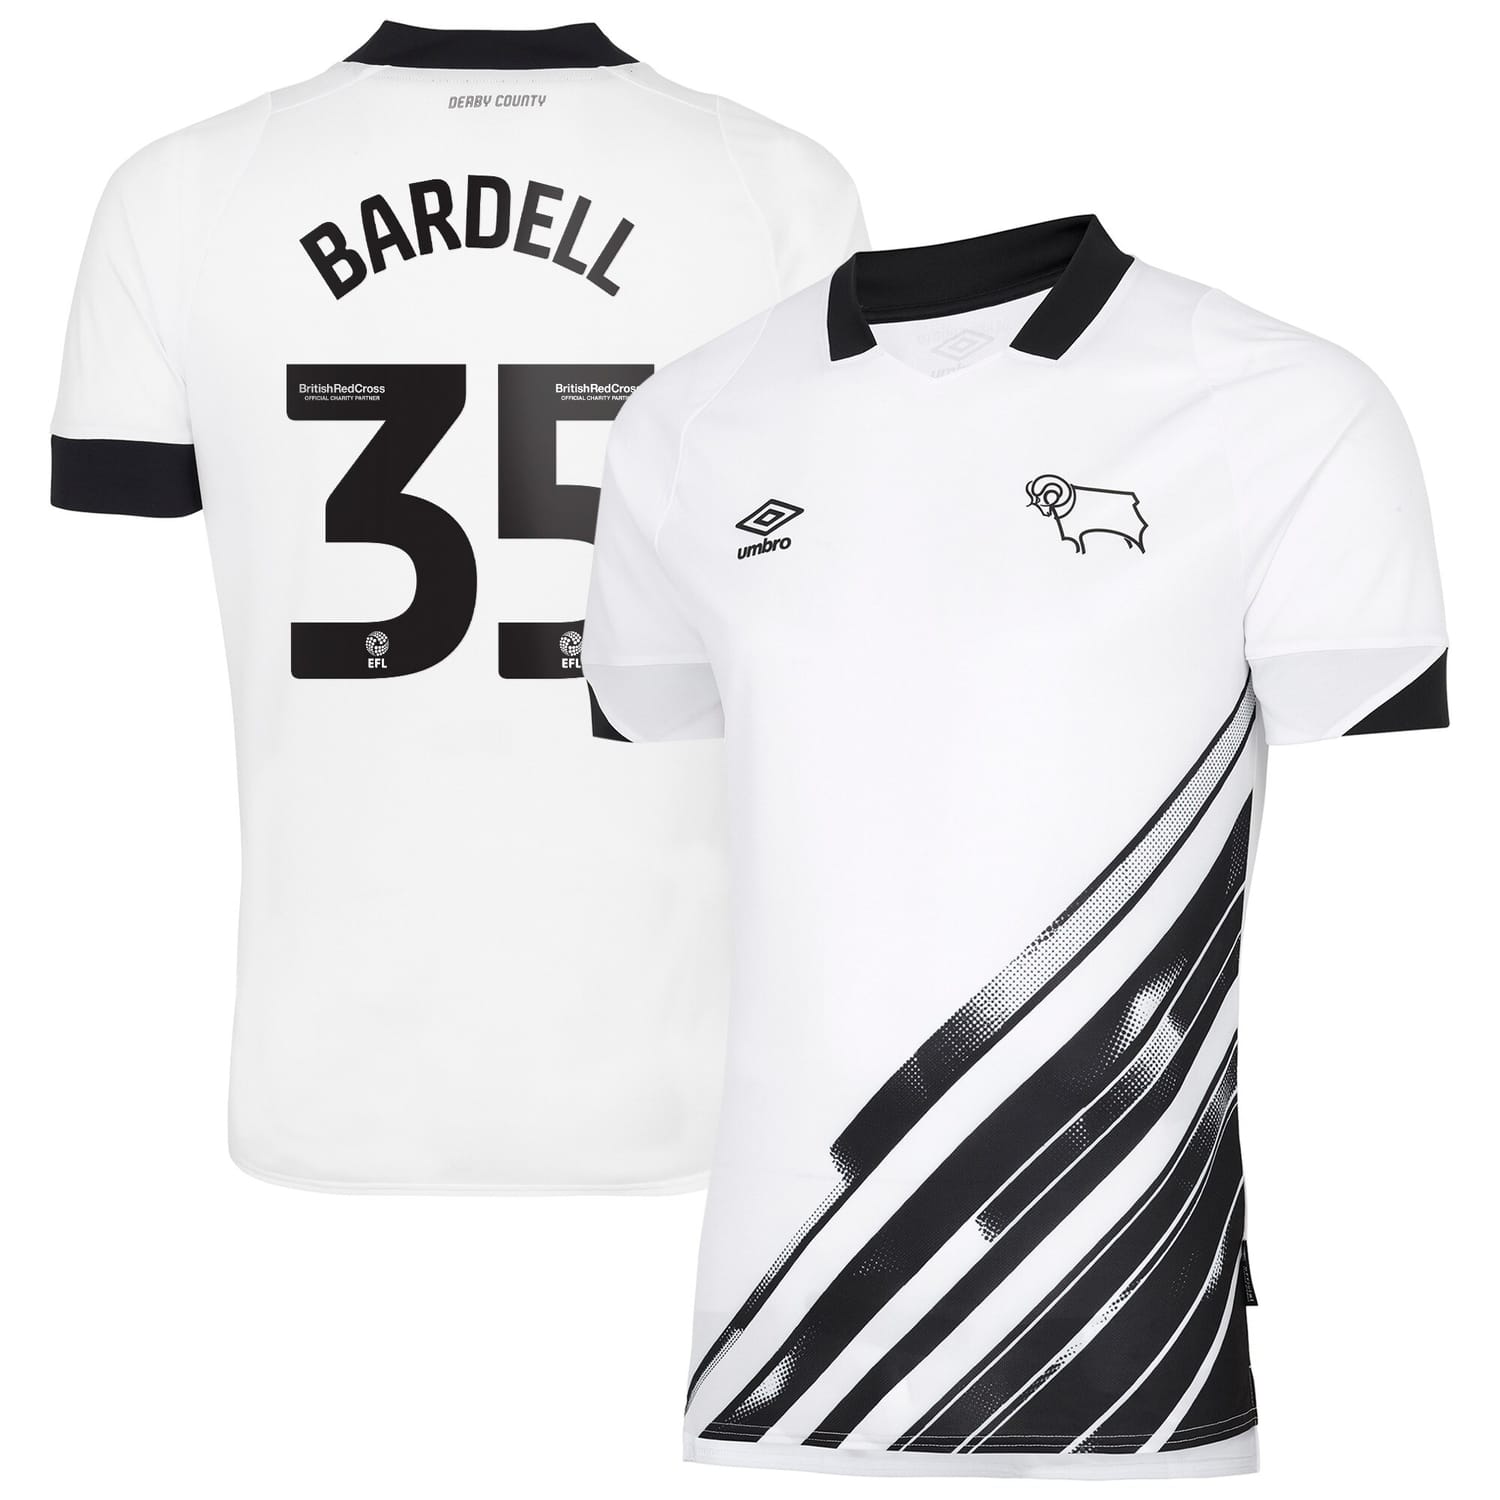 EFL League One Derby County Home Jersey Shirt 2022-23 player Max Bardell 35 printing for Men